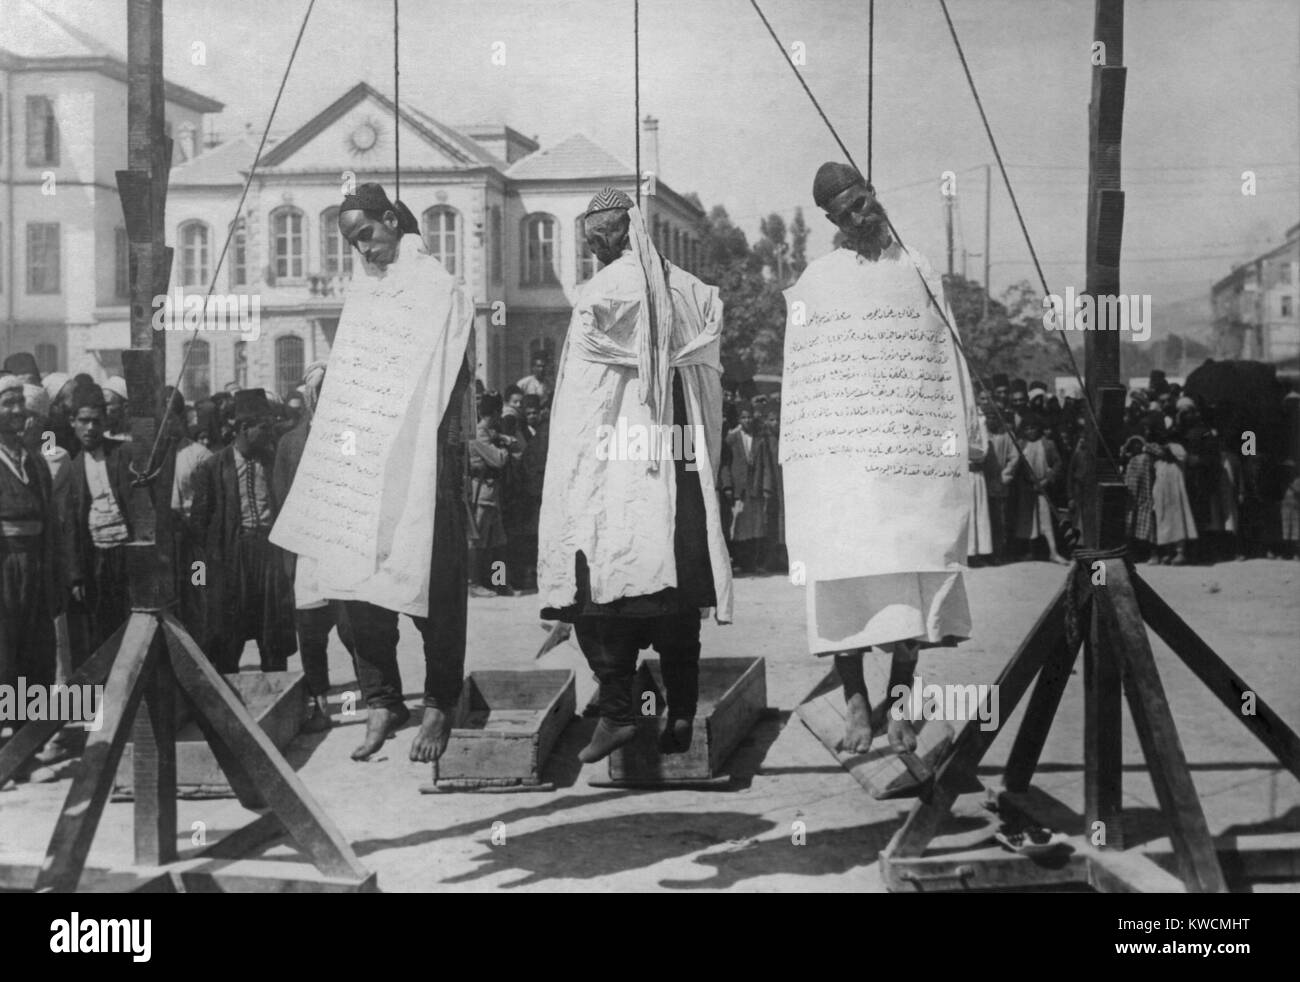 Triple hanging of Druse 'bandits' in Marjeh Square, Damascus, for the murder of French officers. The image may be related to the Great Druze Revolt from July 1925 – June 1927. - (BSLOC 2014 15 195) Stock Photo